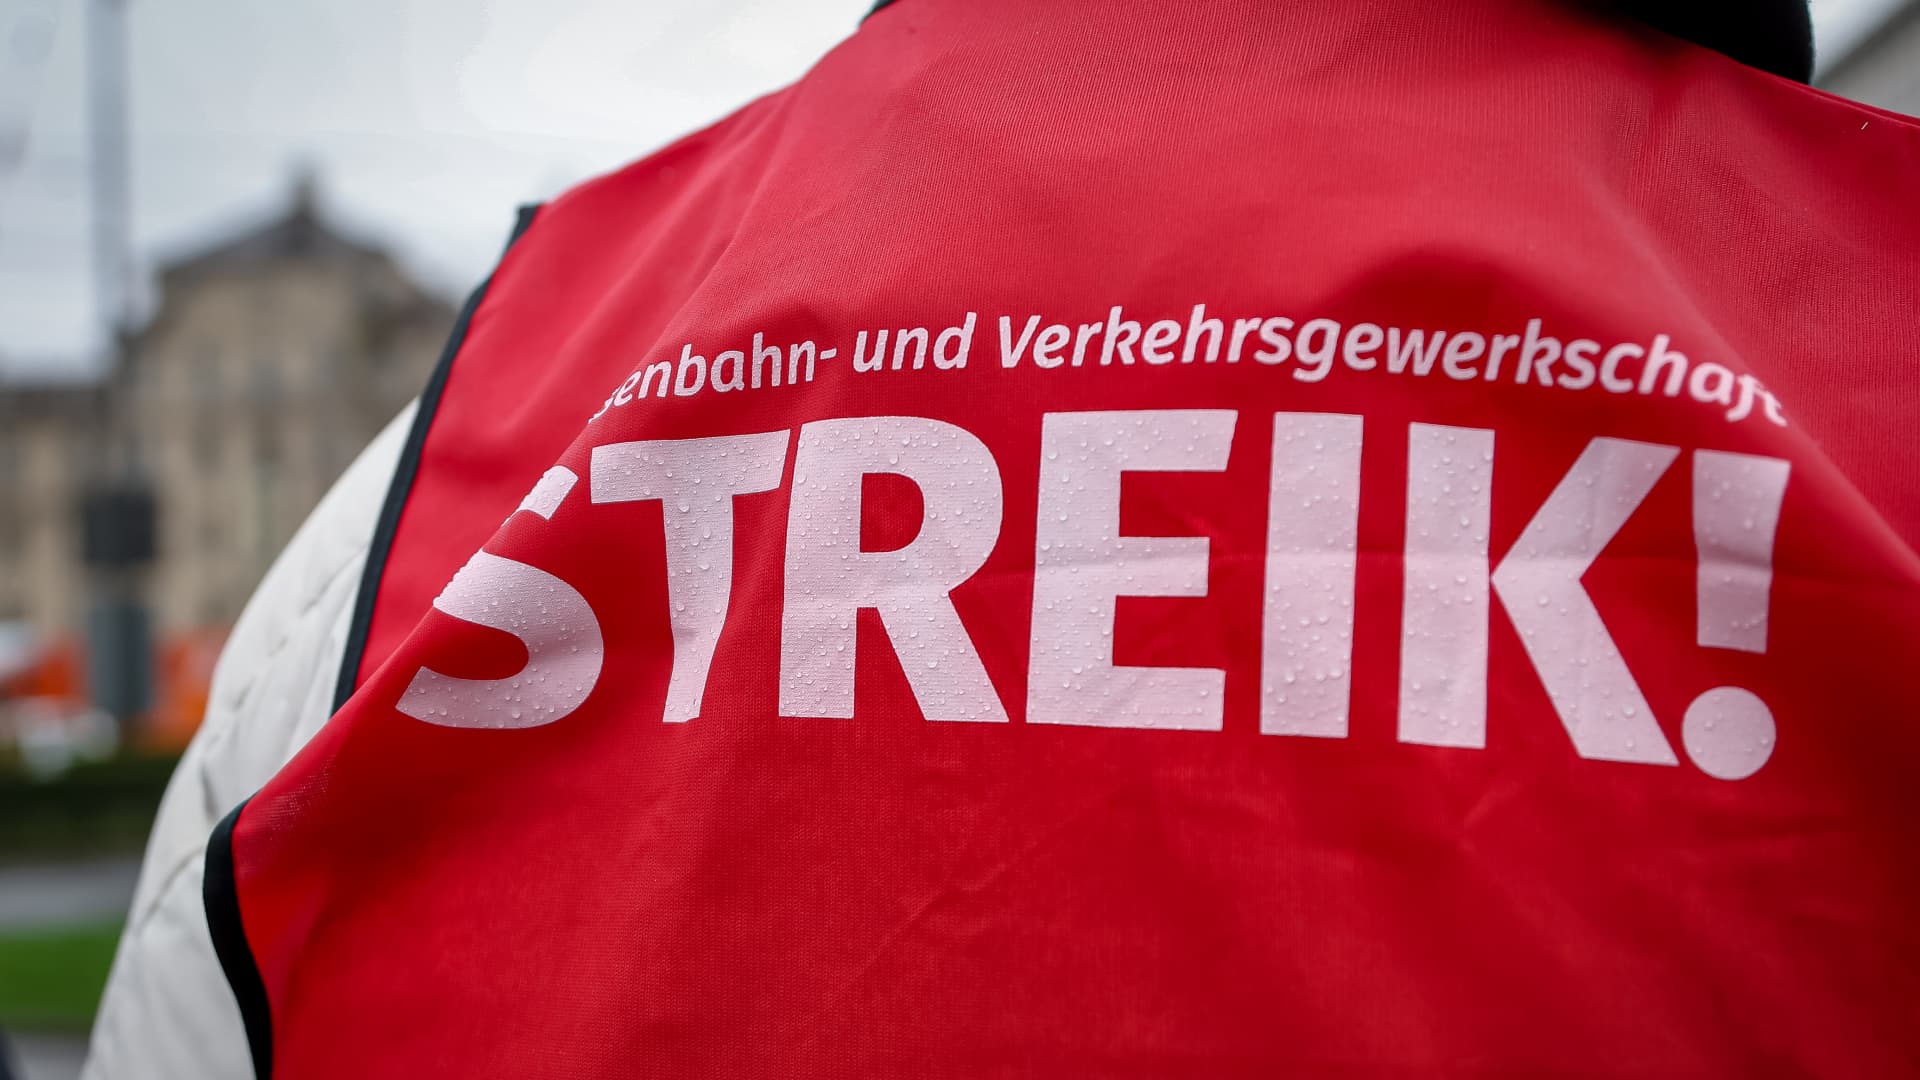 Premier strike in many years delivers Germany to a standstill